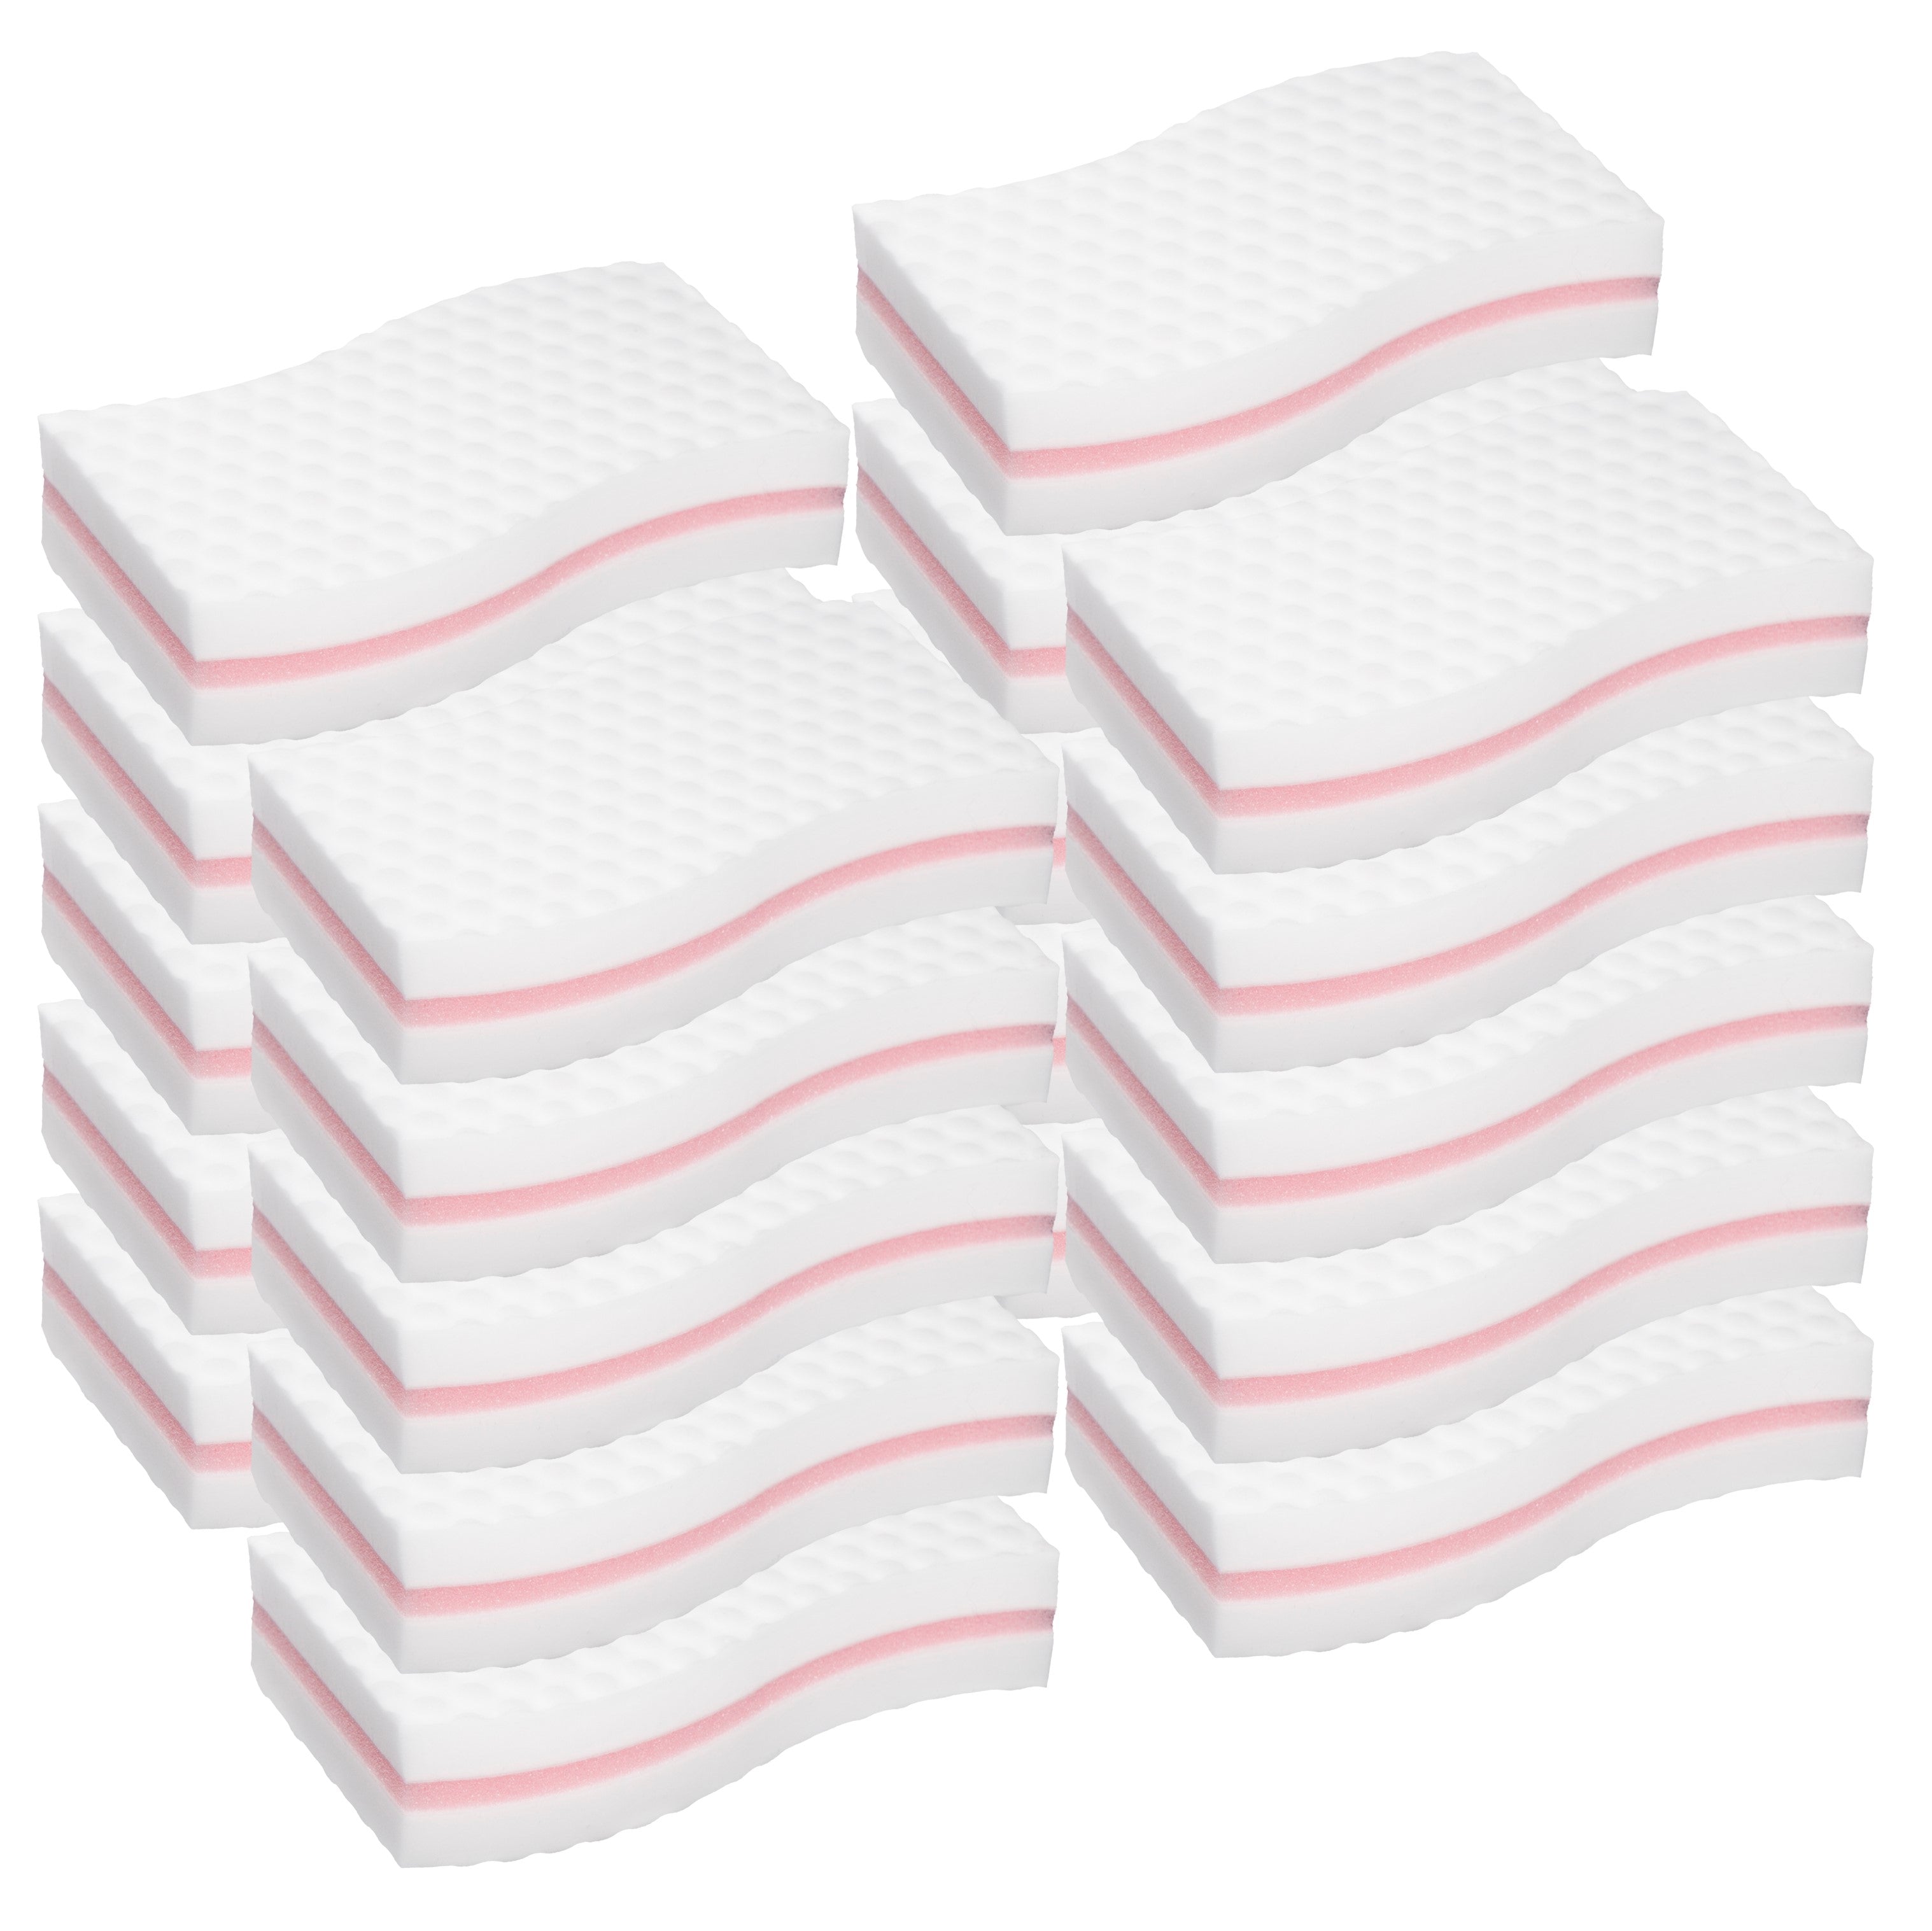 LTWHOME High Density Cuty Pink Interlayer Extra Large 5.5 Inch x 2.75 Inch x 1.38 Inch Magic Cleaning Eraser Wave Type Melamine Sponge (Pack of 20)